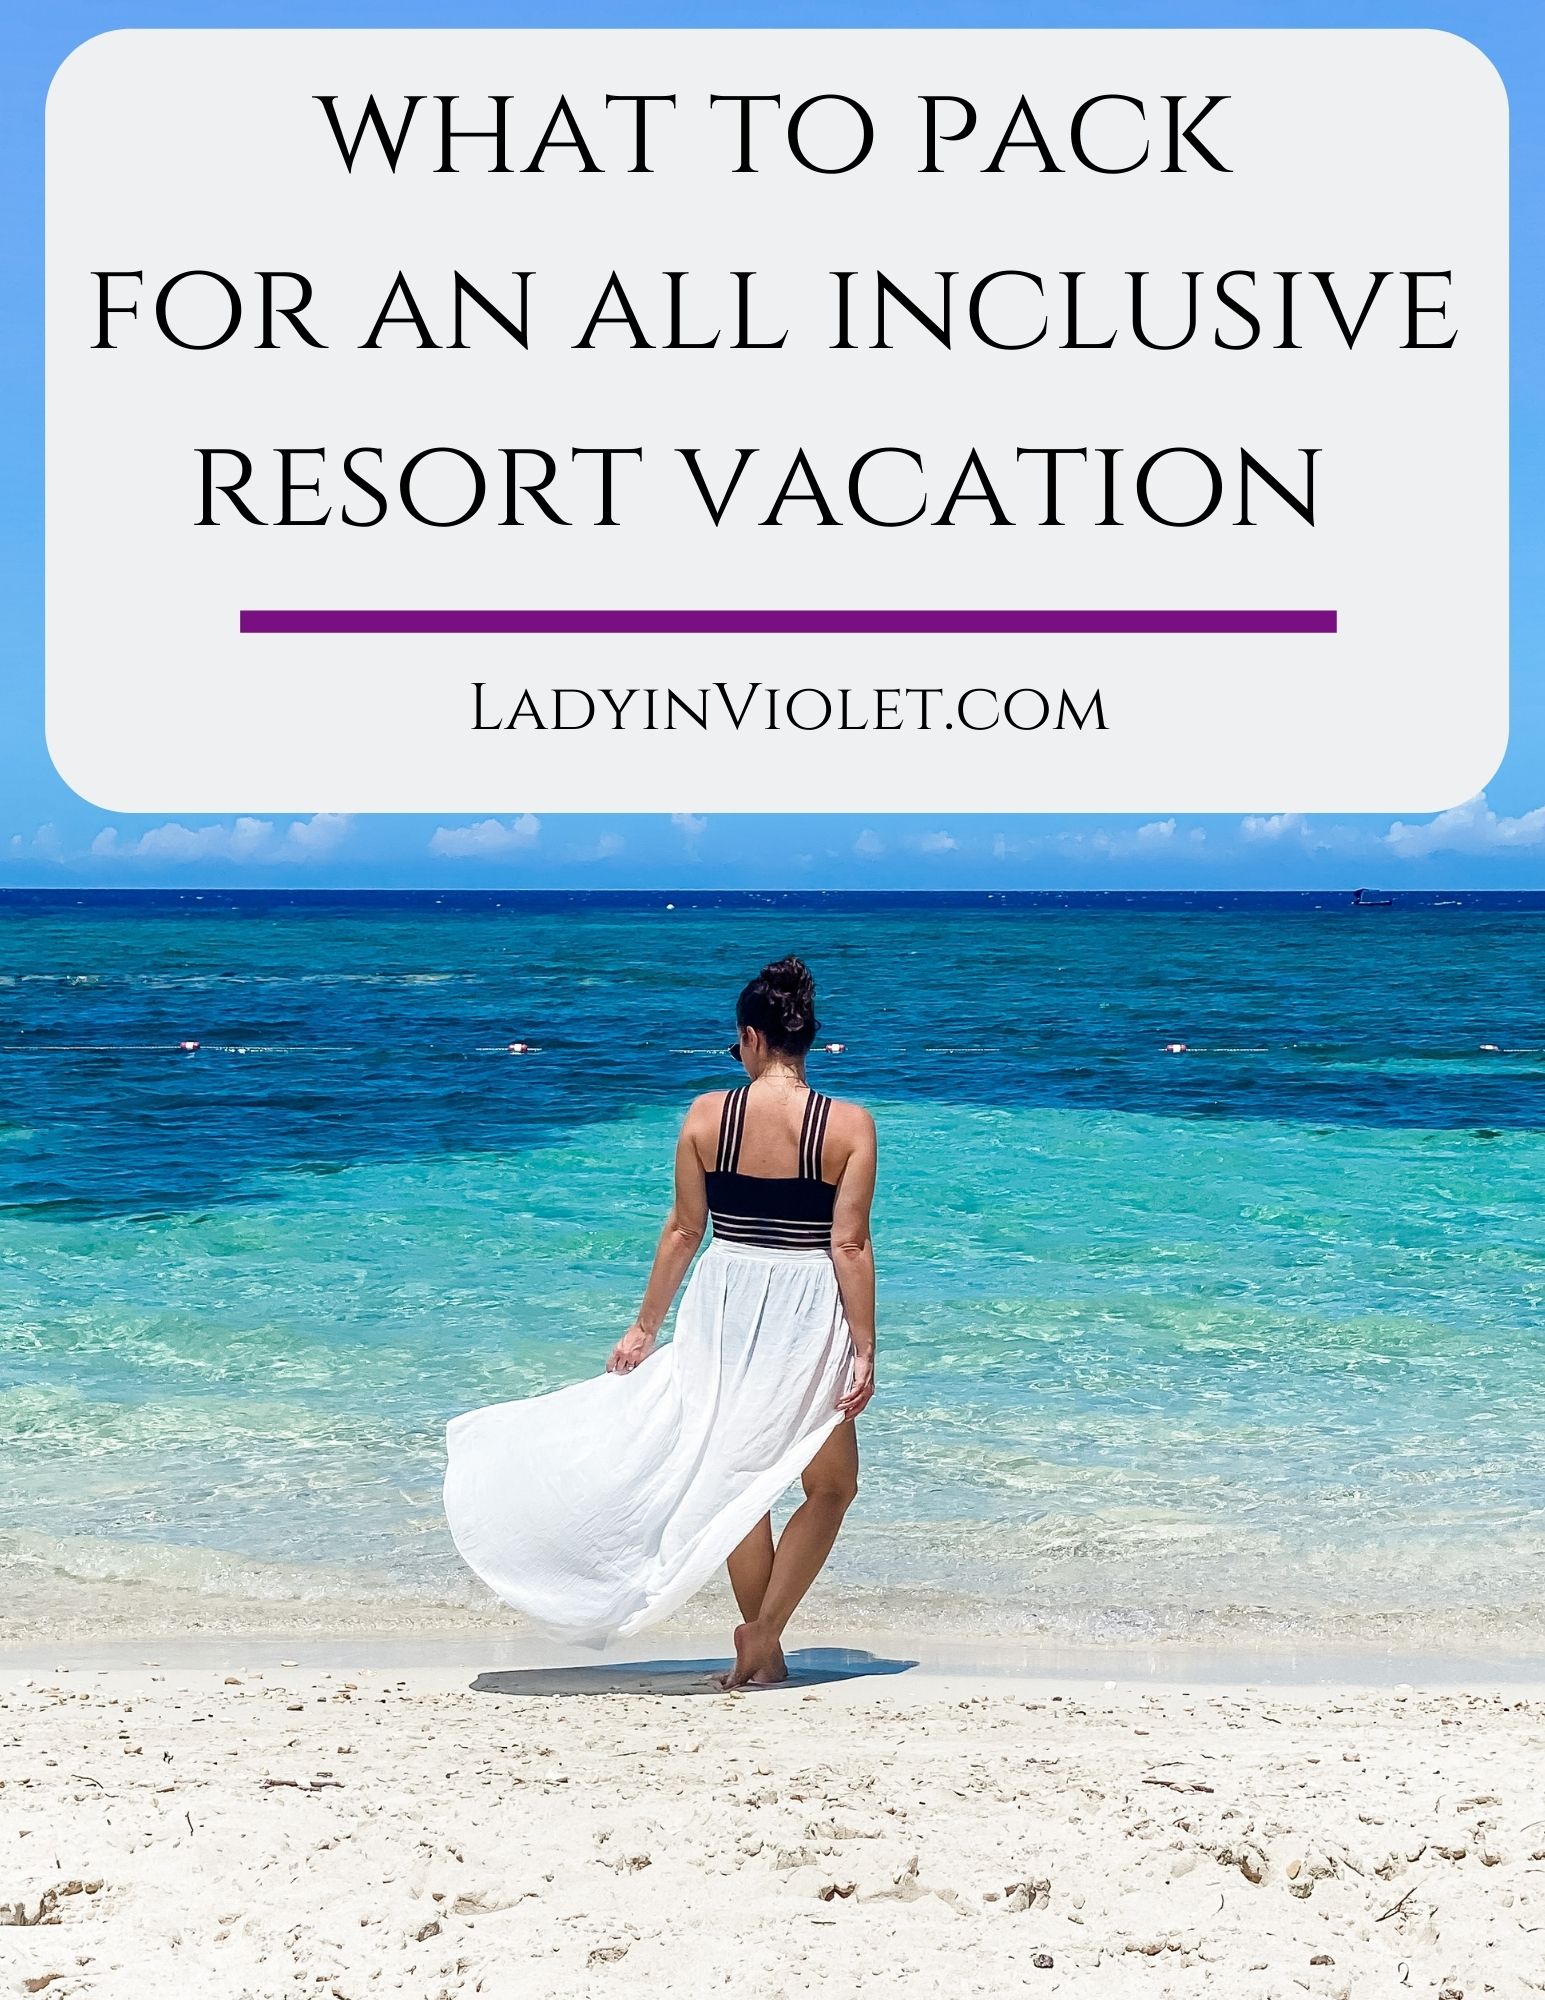 What to Pack for an All Inclusive Resort Vacation Lady in VioletLady